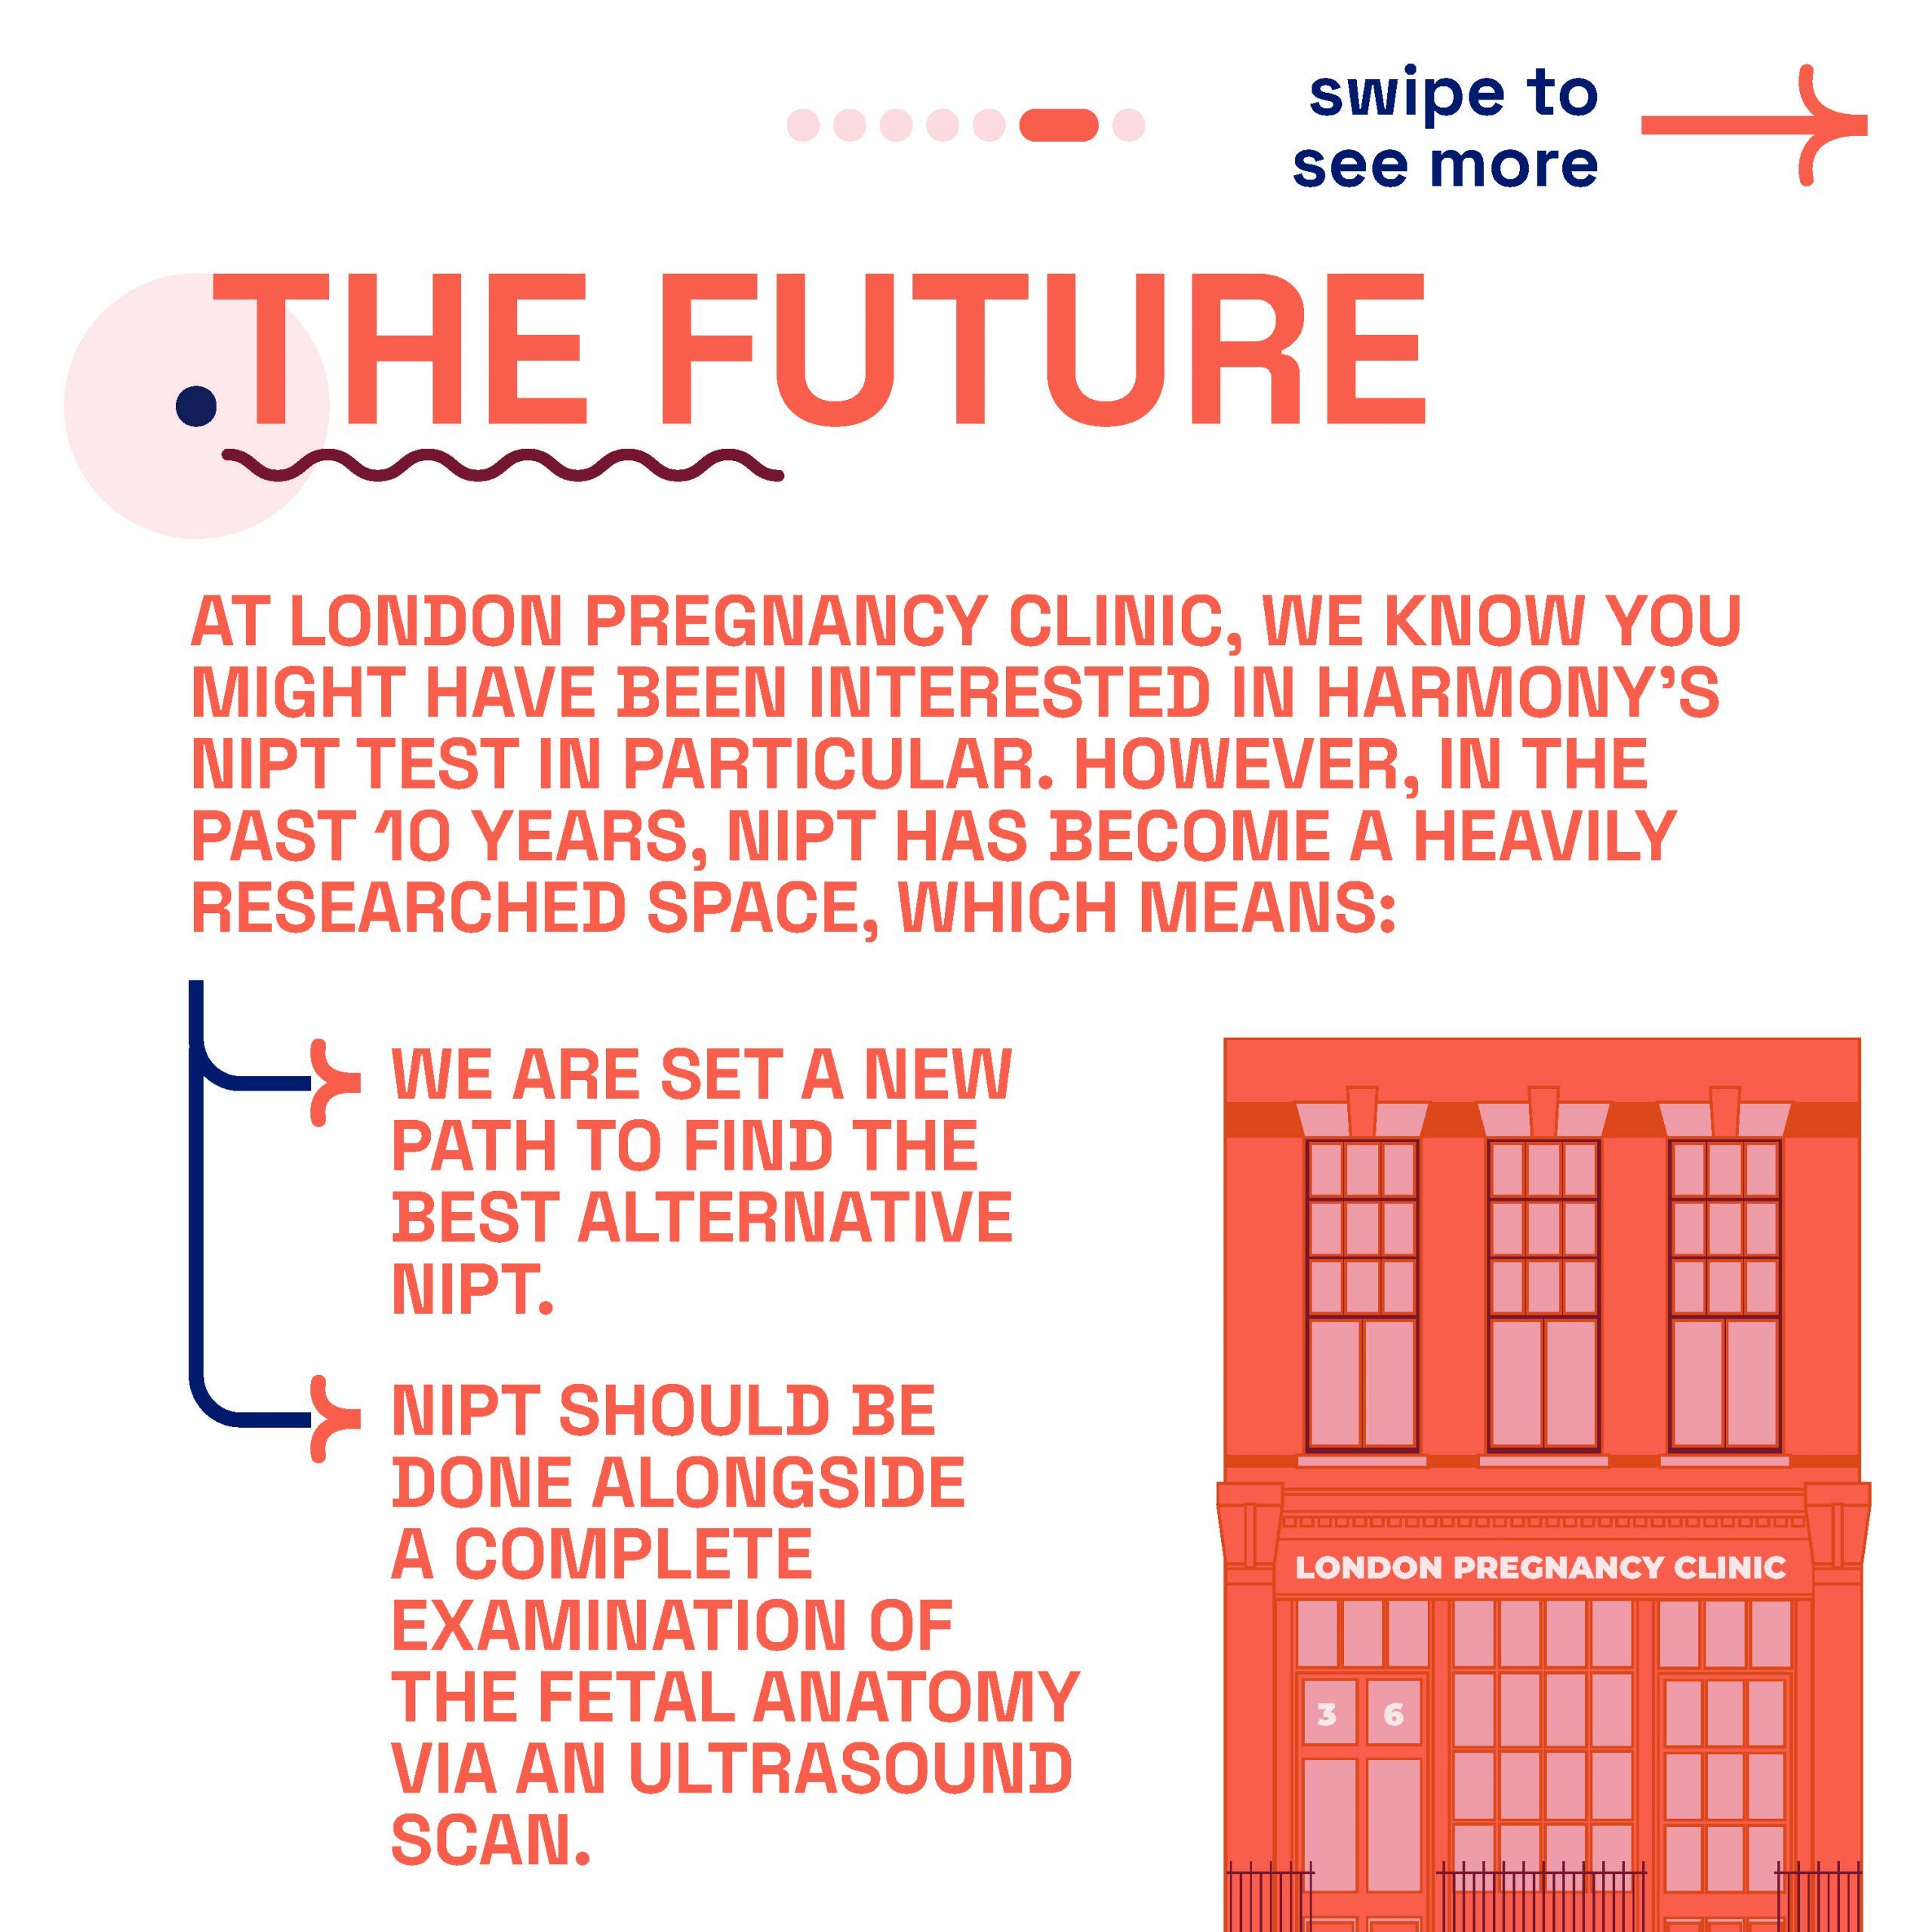 London Pregnancy Clinic's image discussing the future of NIPT tests and the clinic's approach to finding the best alternatives alongside a complete fetal anatomy examination.